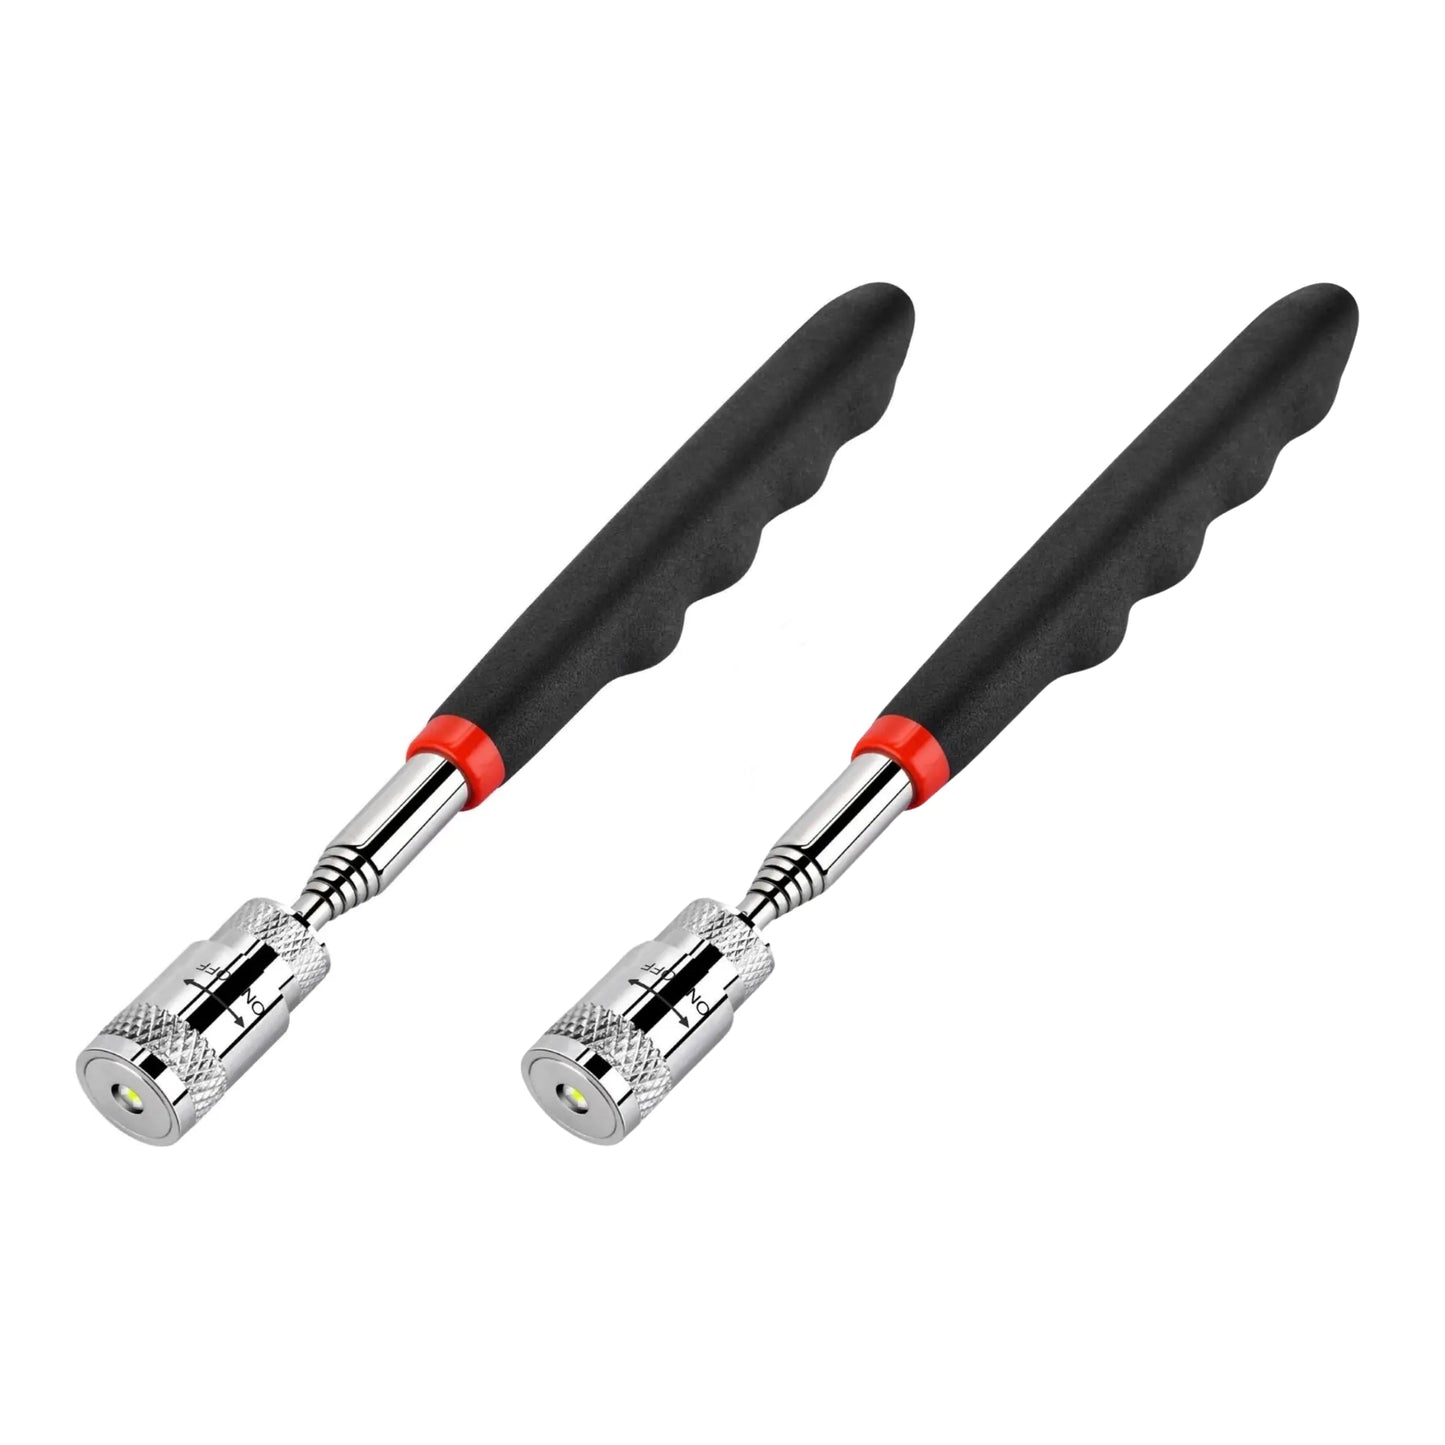 Magnetic Pick-Up Tool with LED Light (2-Pack)